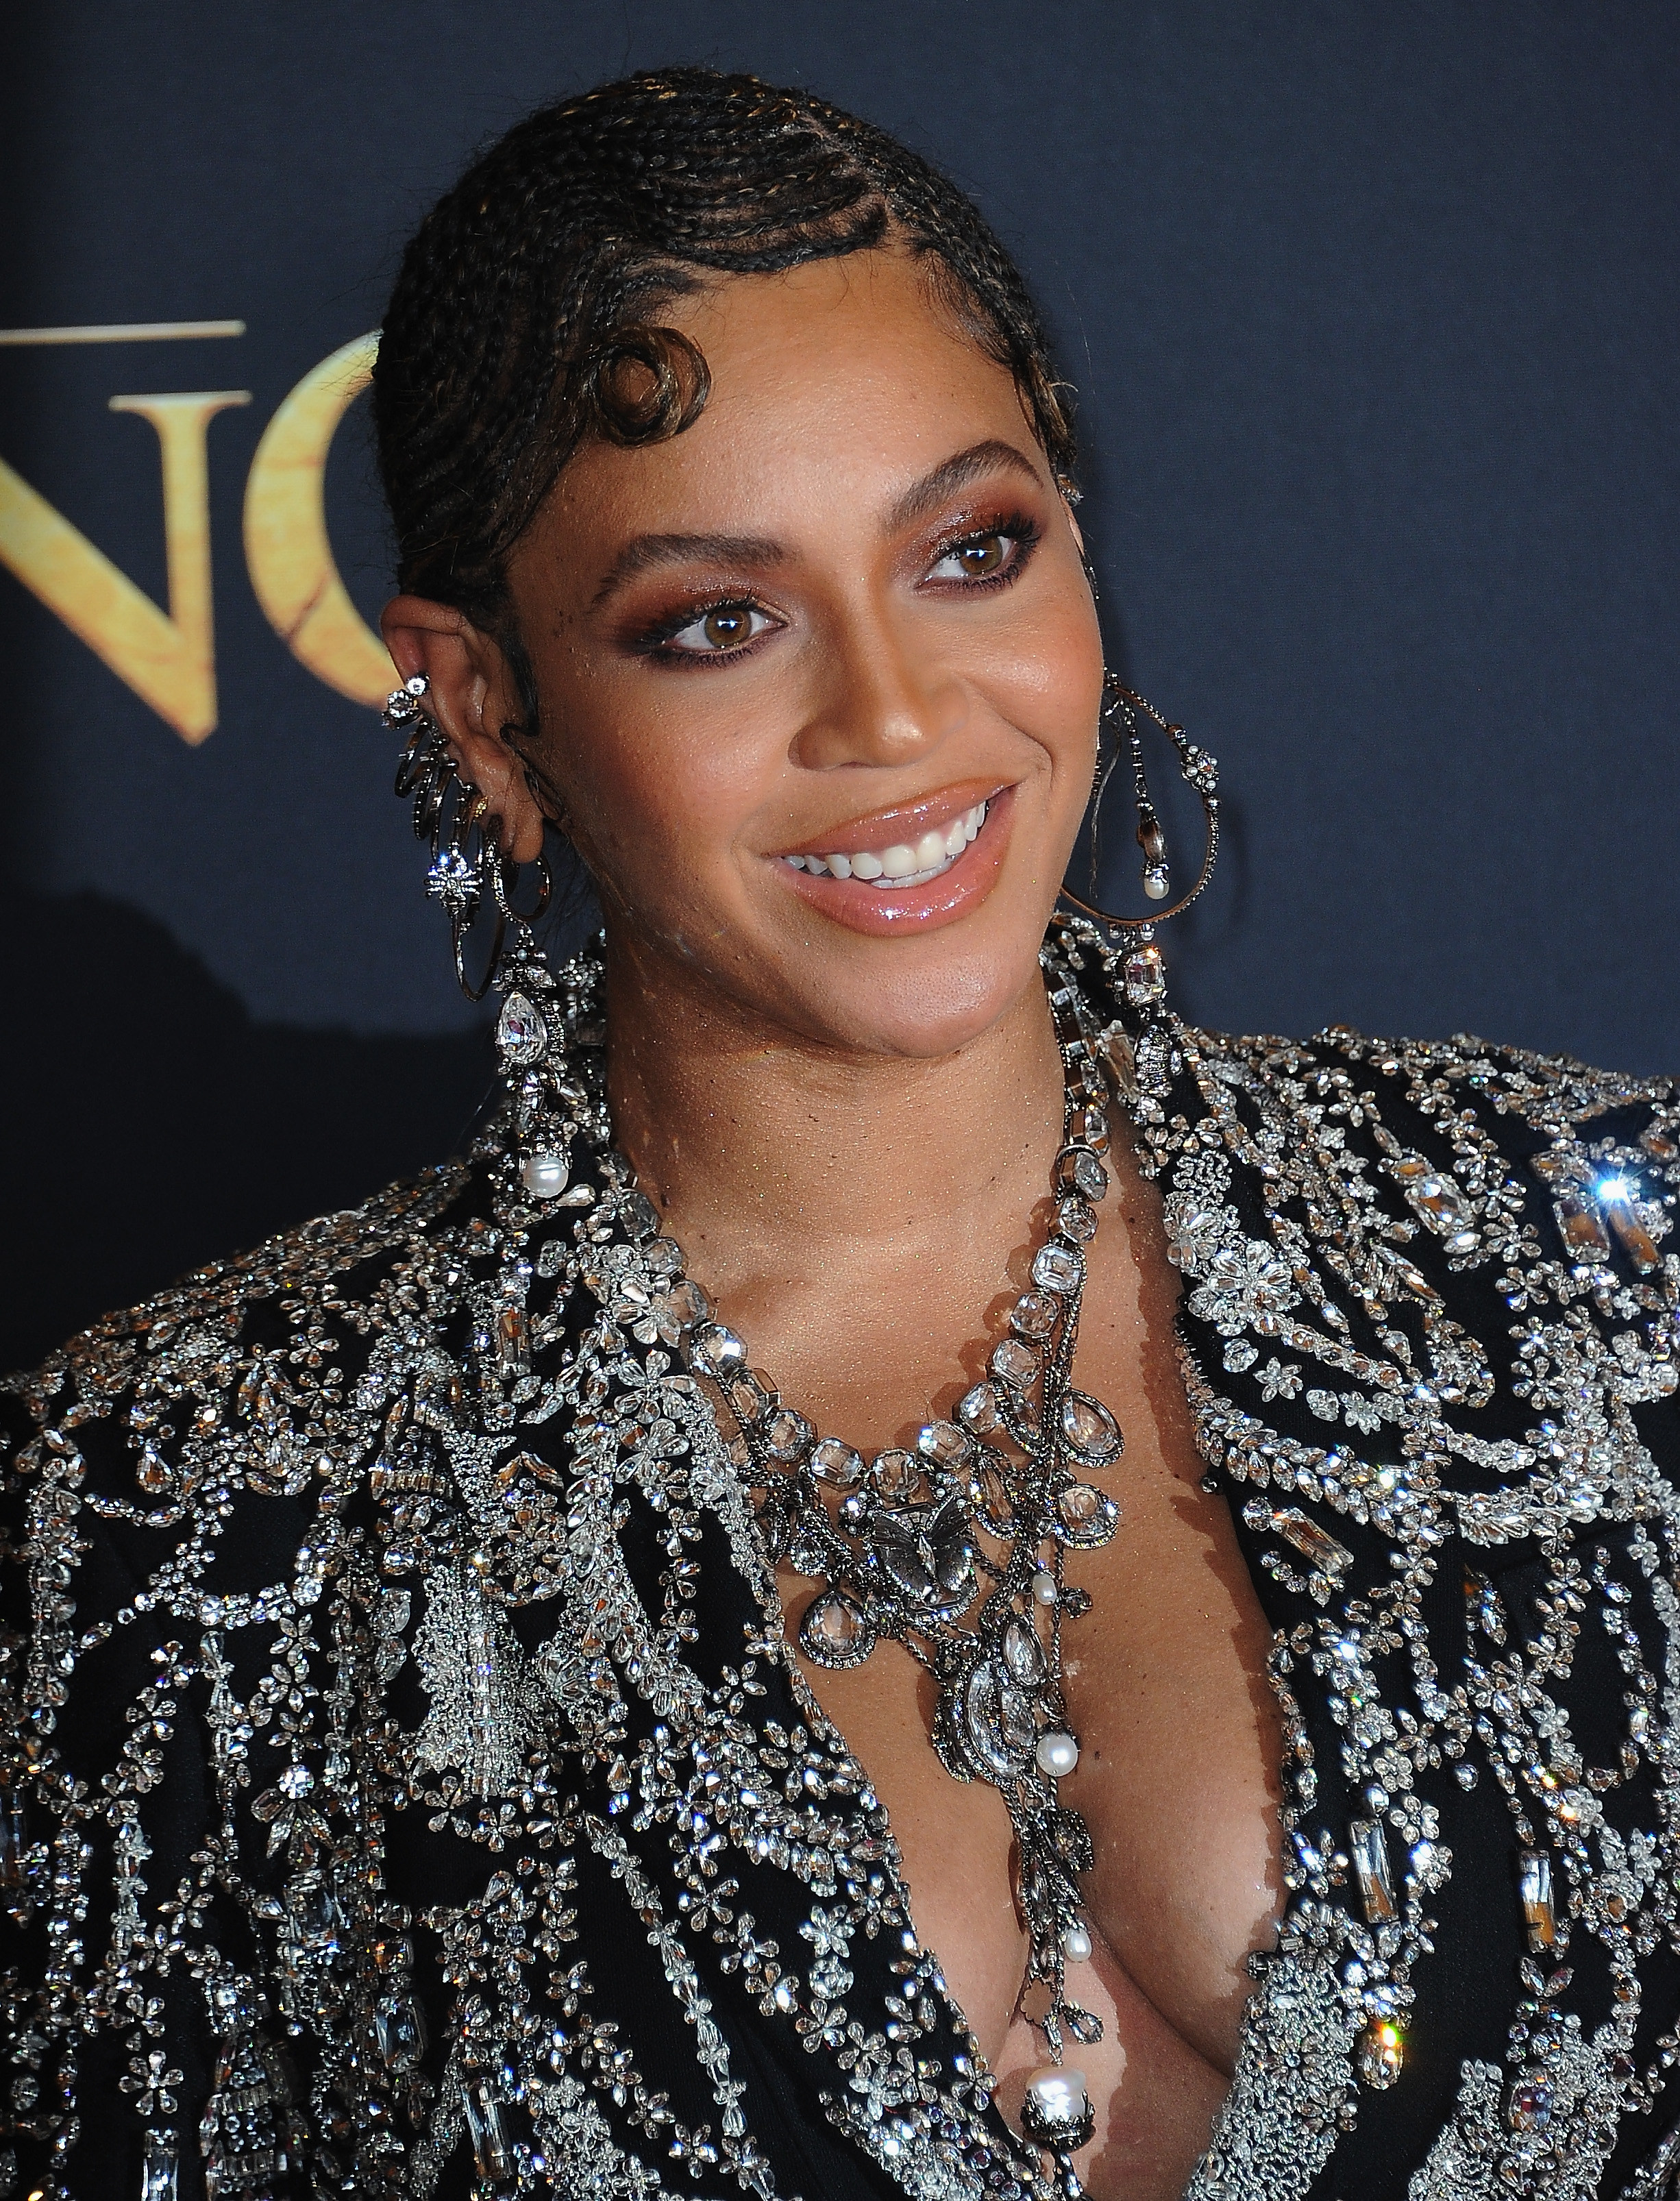 Close-up of Beyoncé smiling in a bejeweled outfit